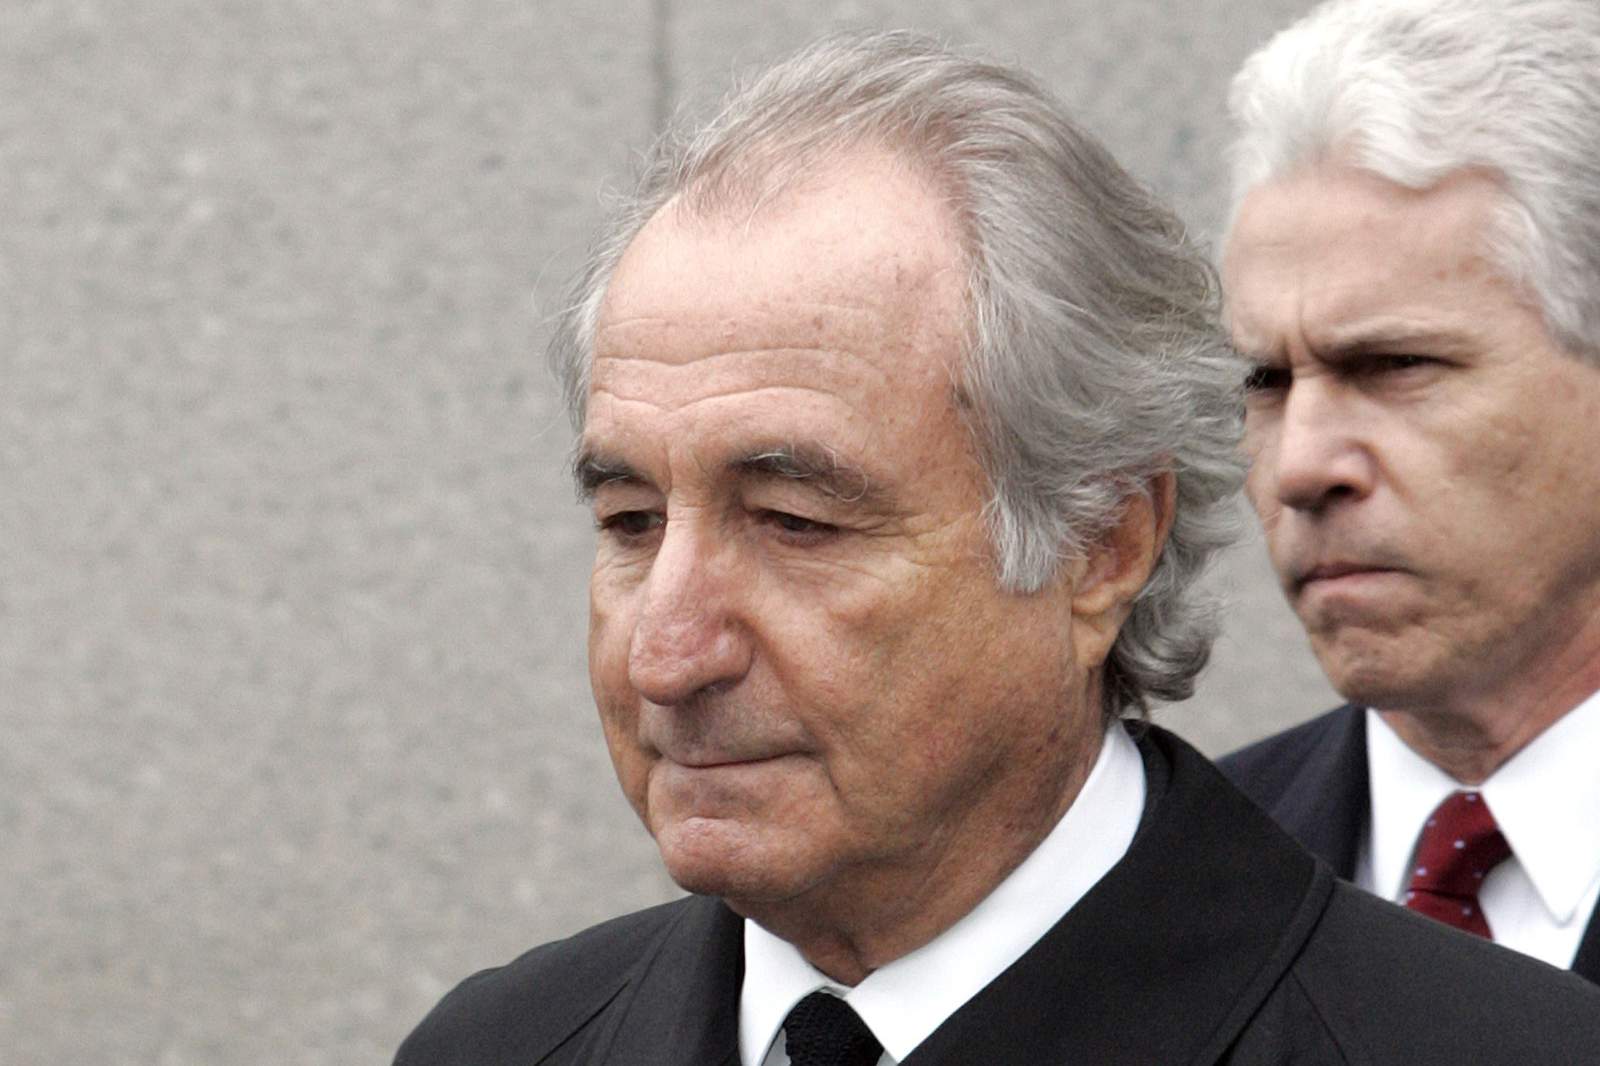 EXPLAINER: Charmed by Madoff, SEC later tightened its rules